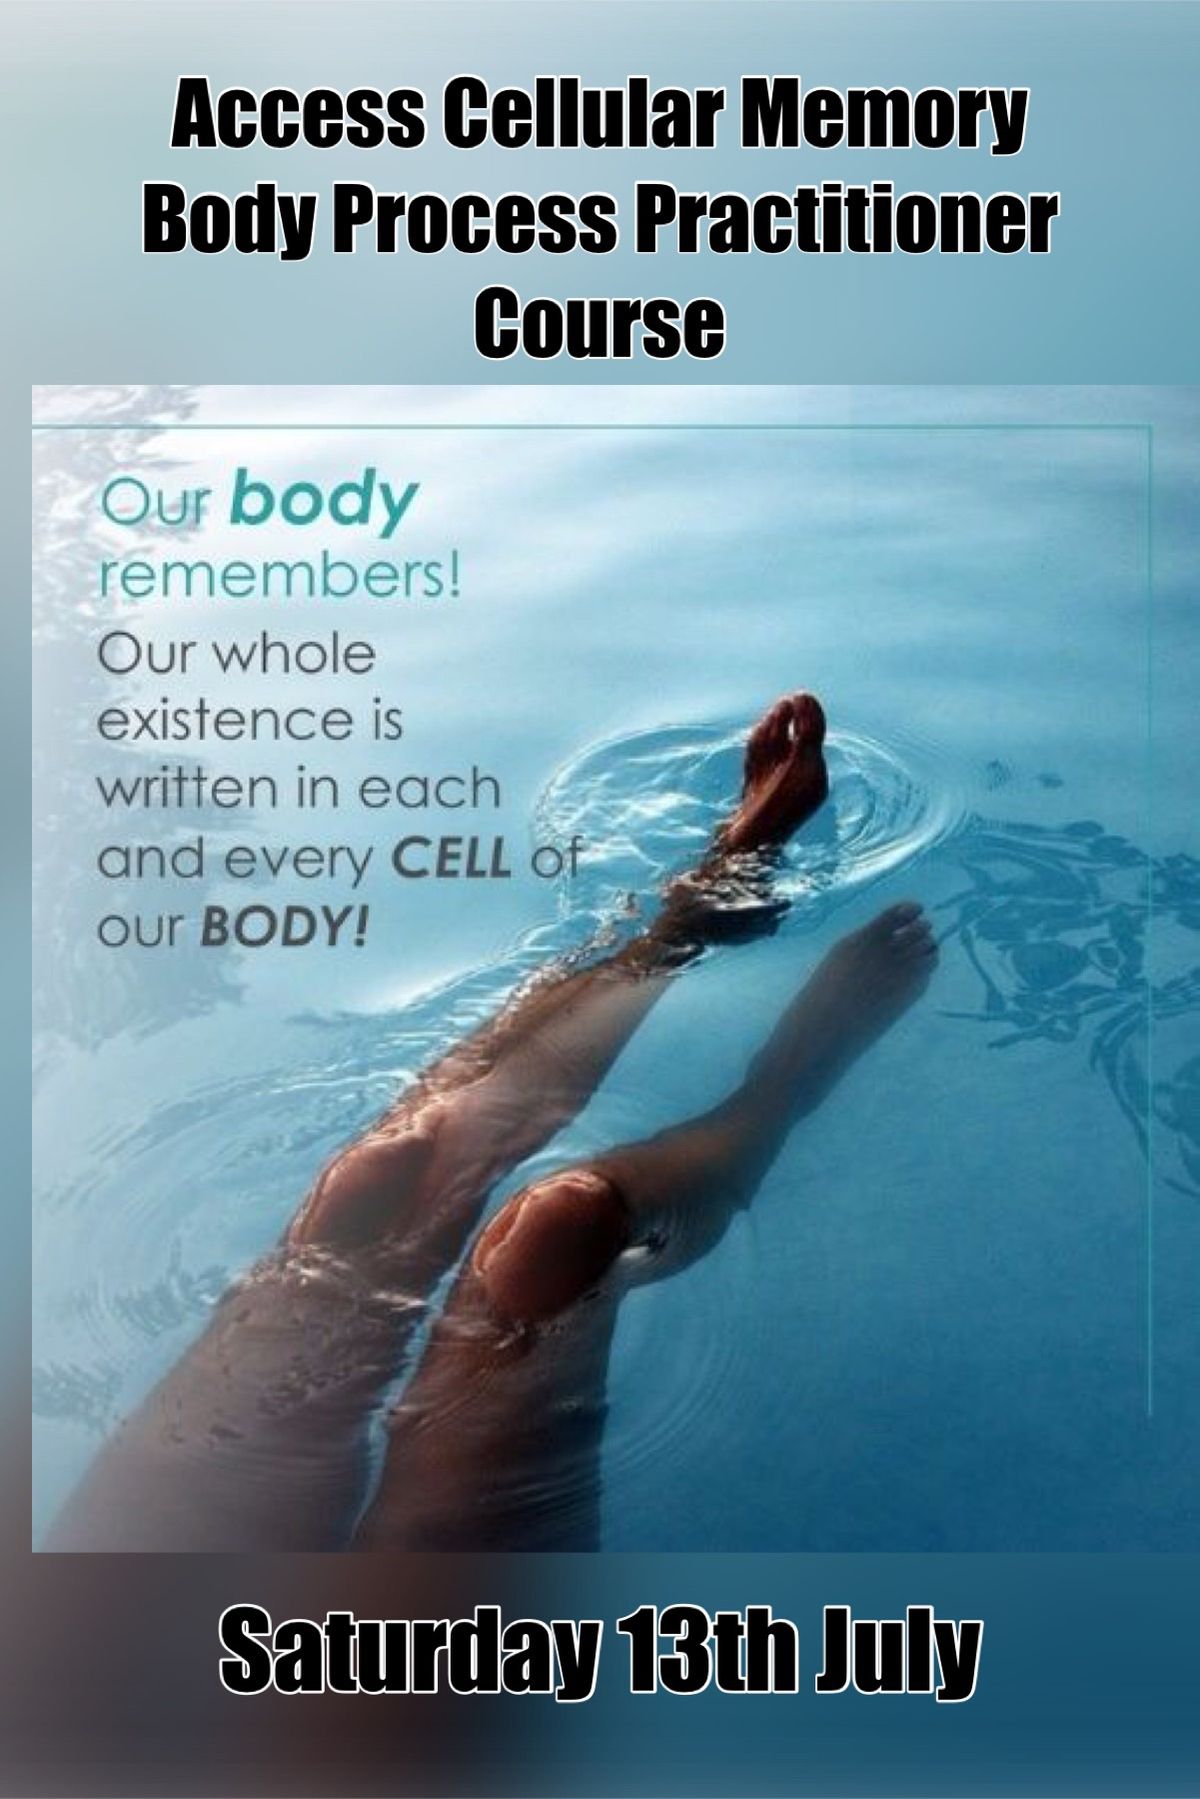 Access Cellular Memory Body Process Practitioner Course 